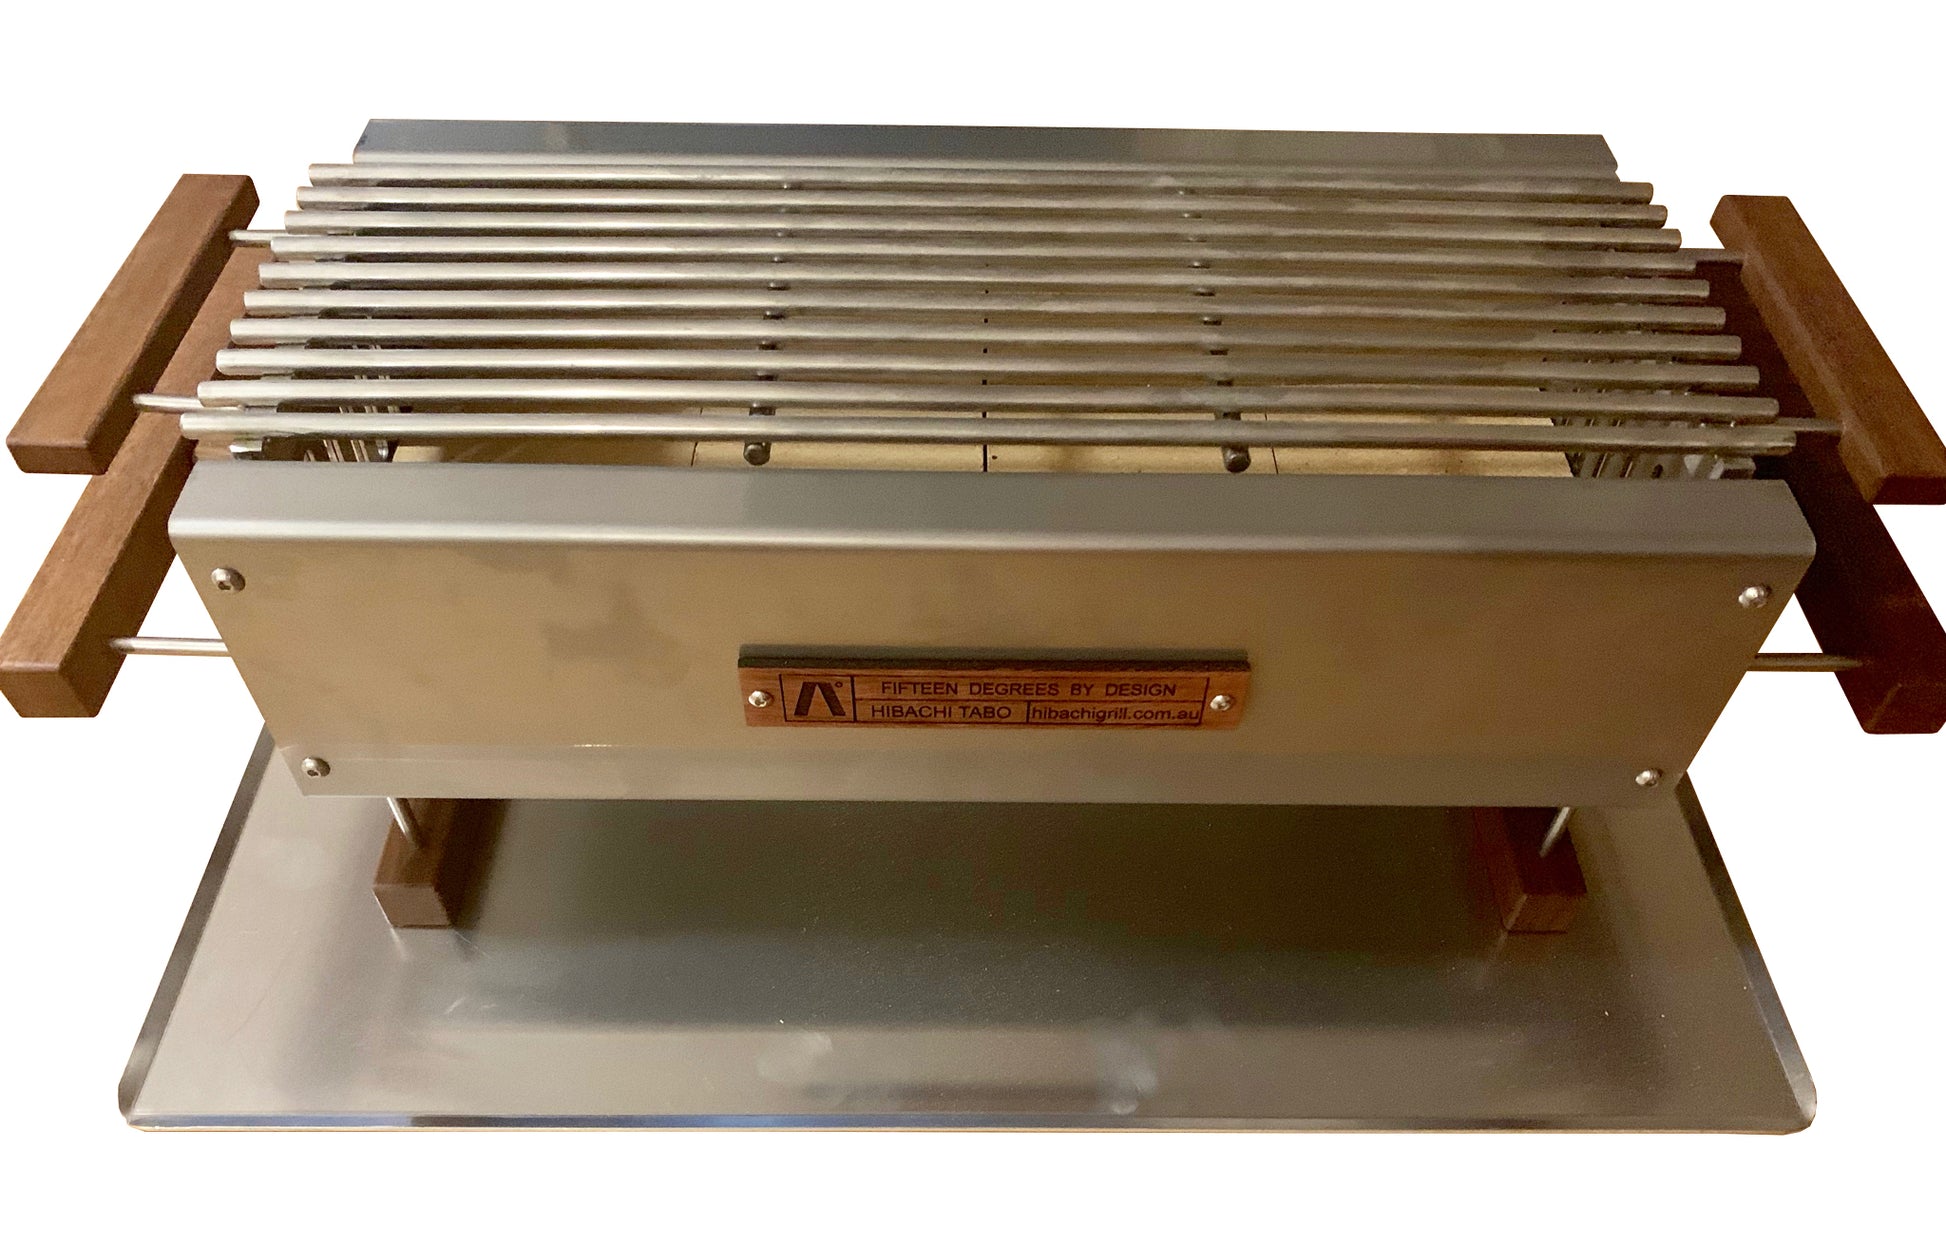 Hibachi Tabo - Australian designed and made stainless steel charcoal grill